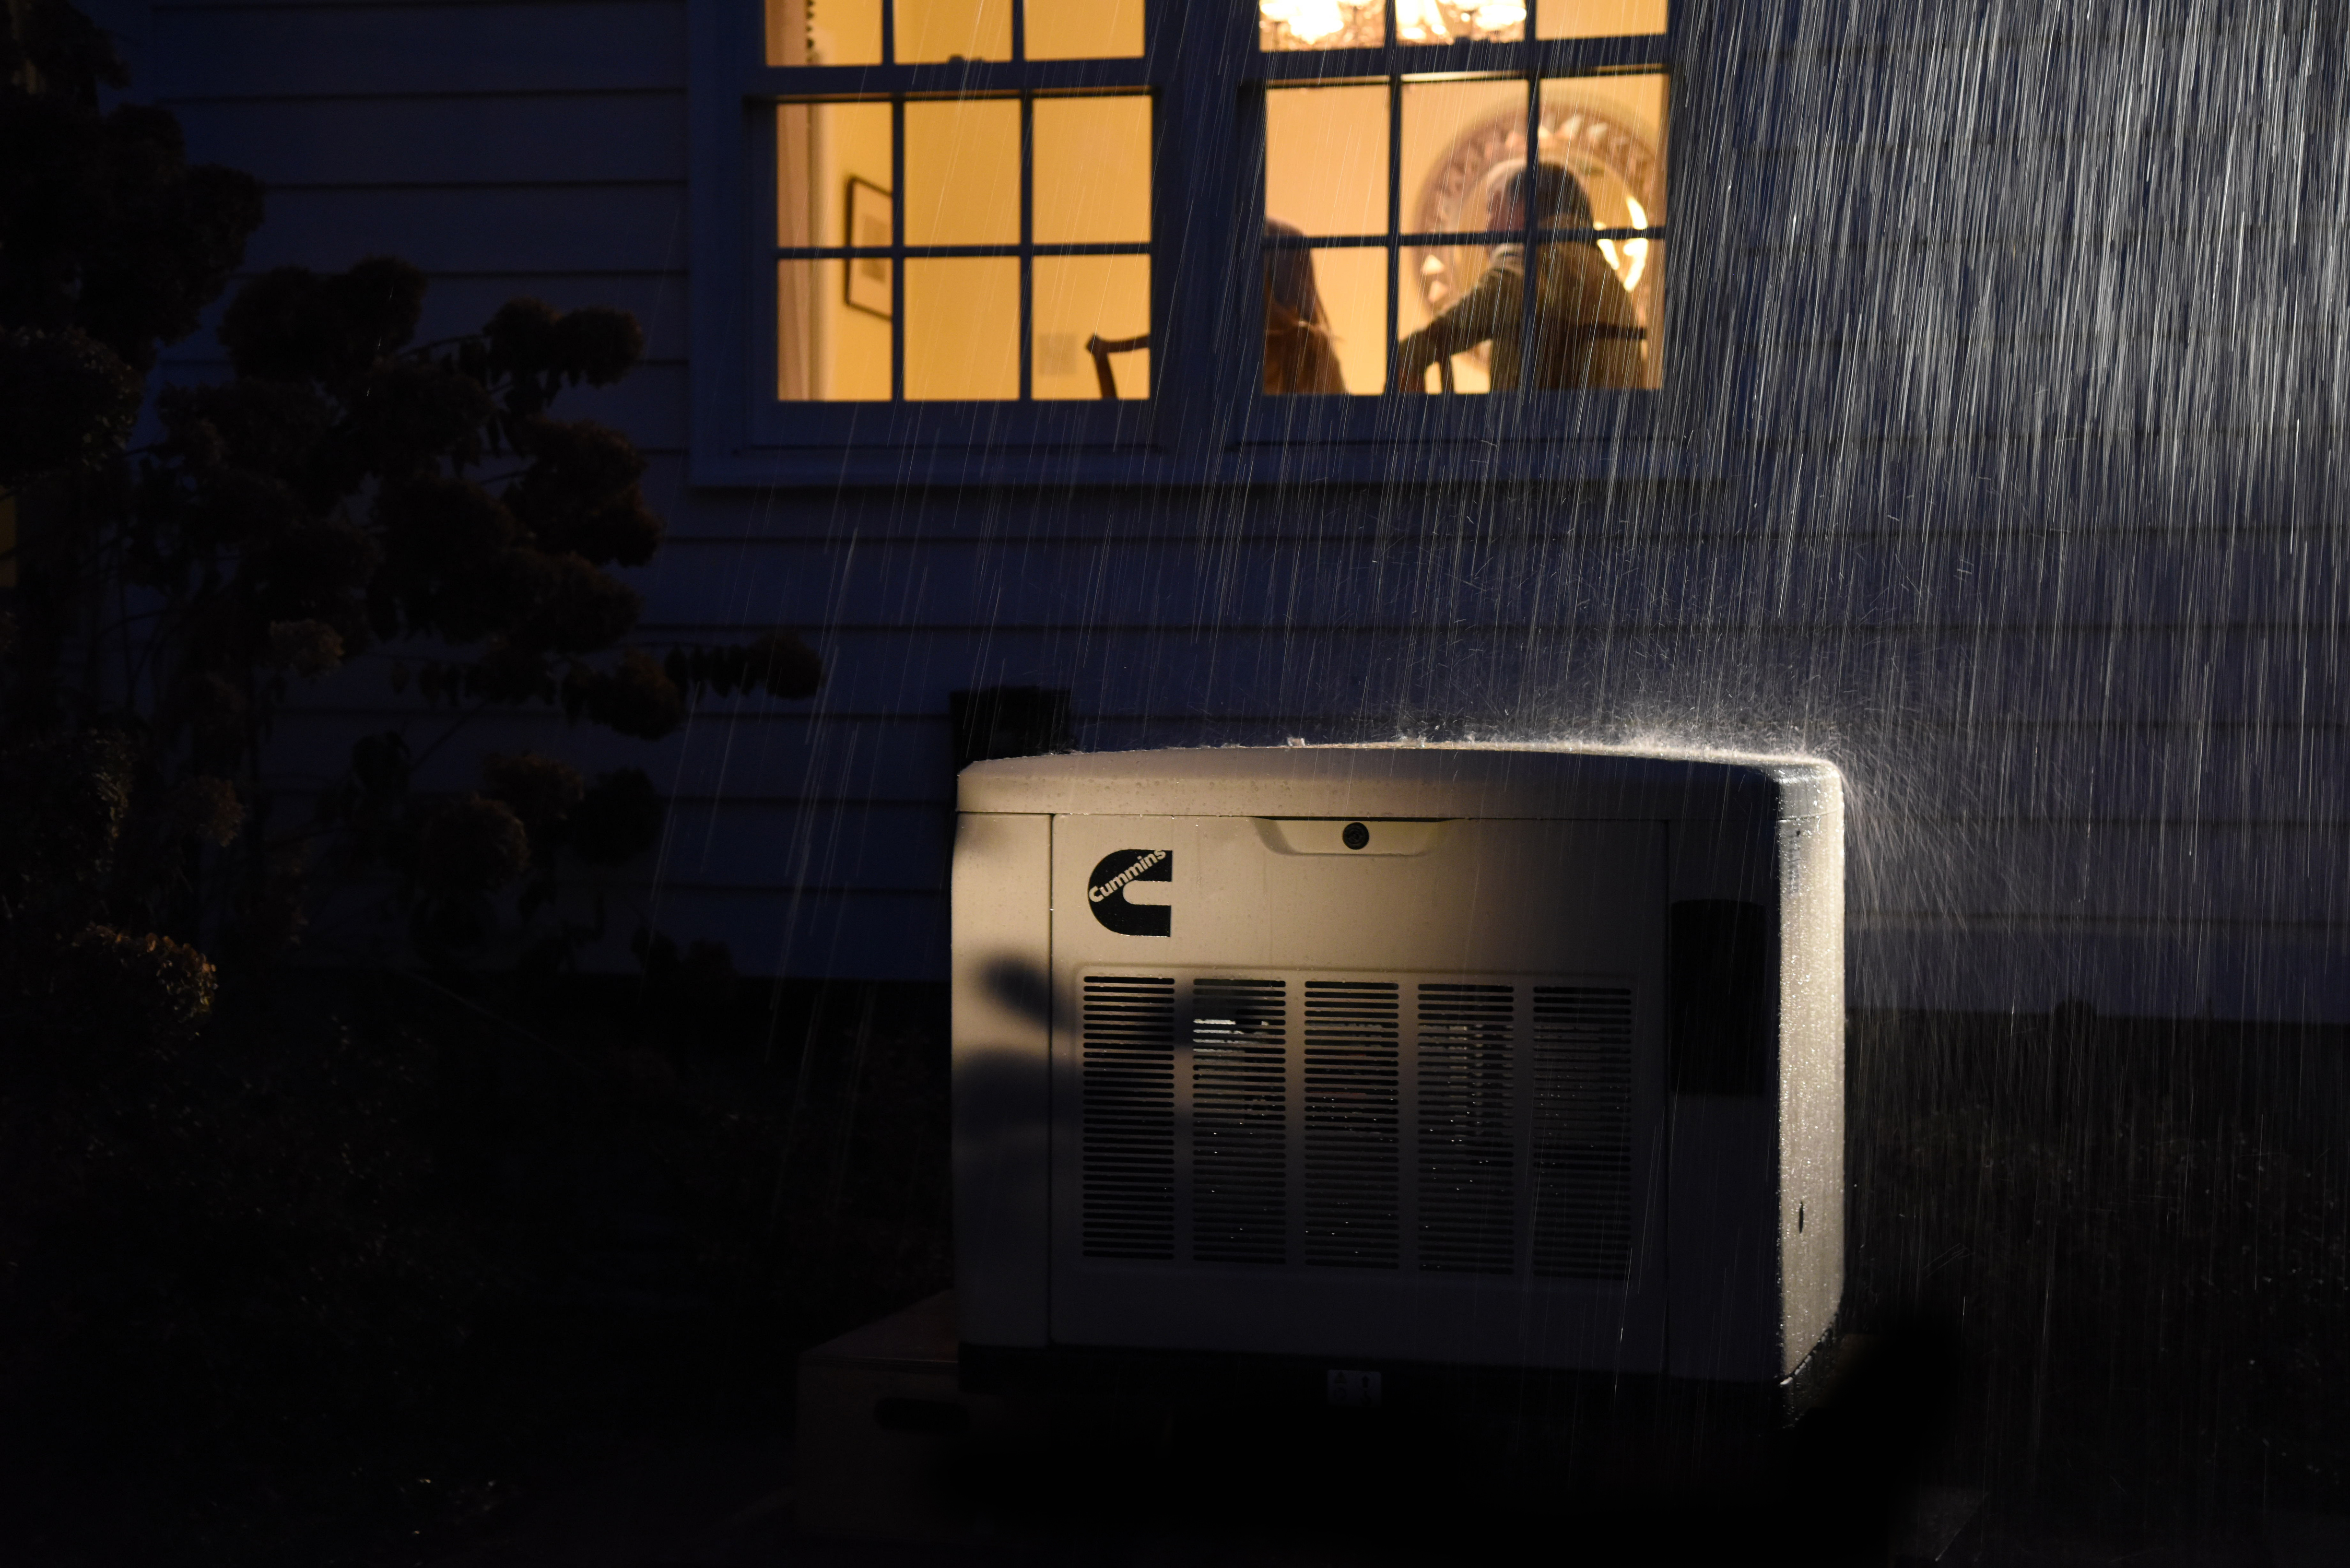 A Cummins Quiet Connect Standby Generator powering a home during a storm